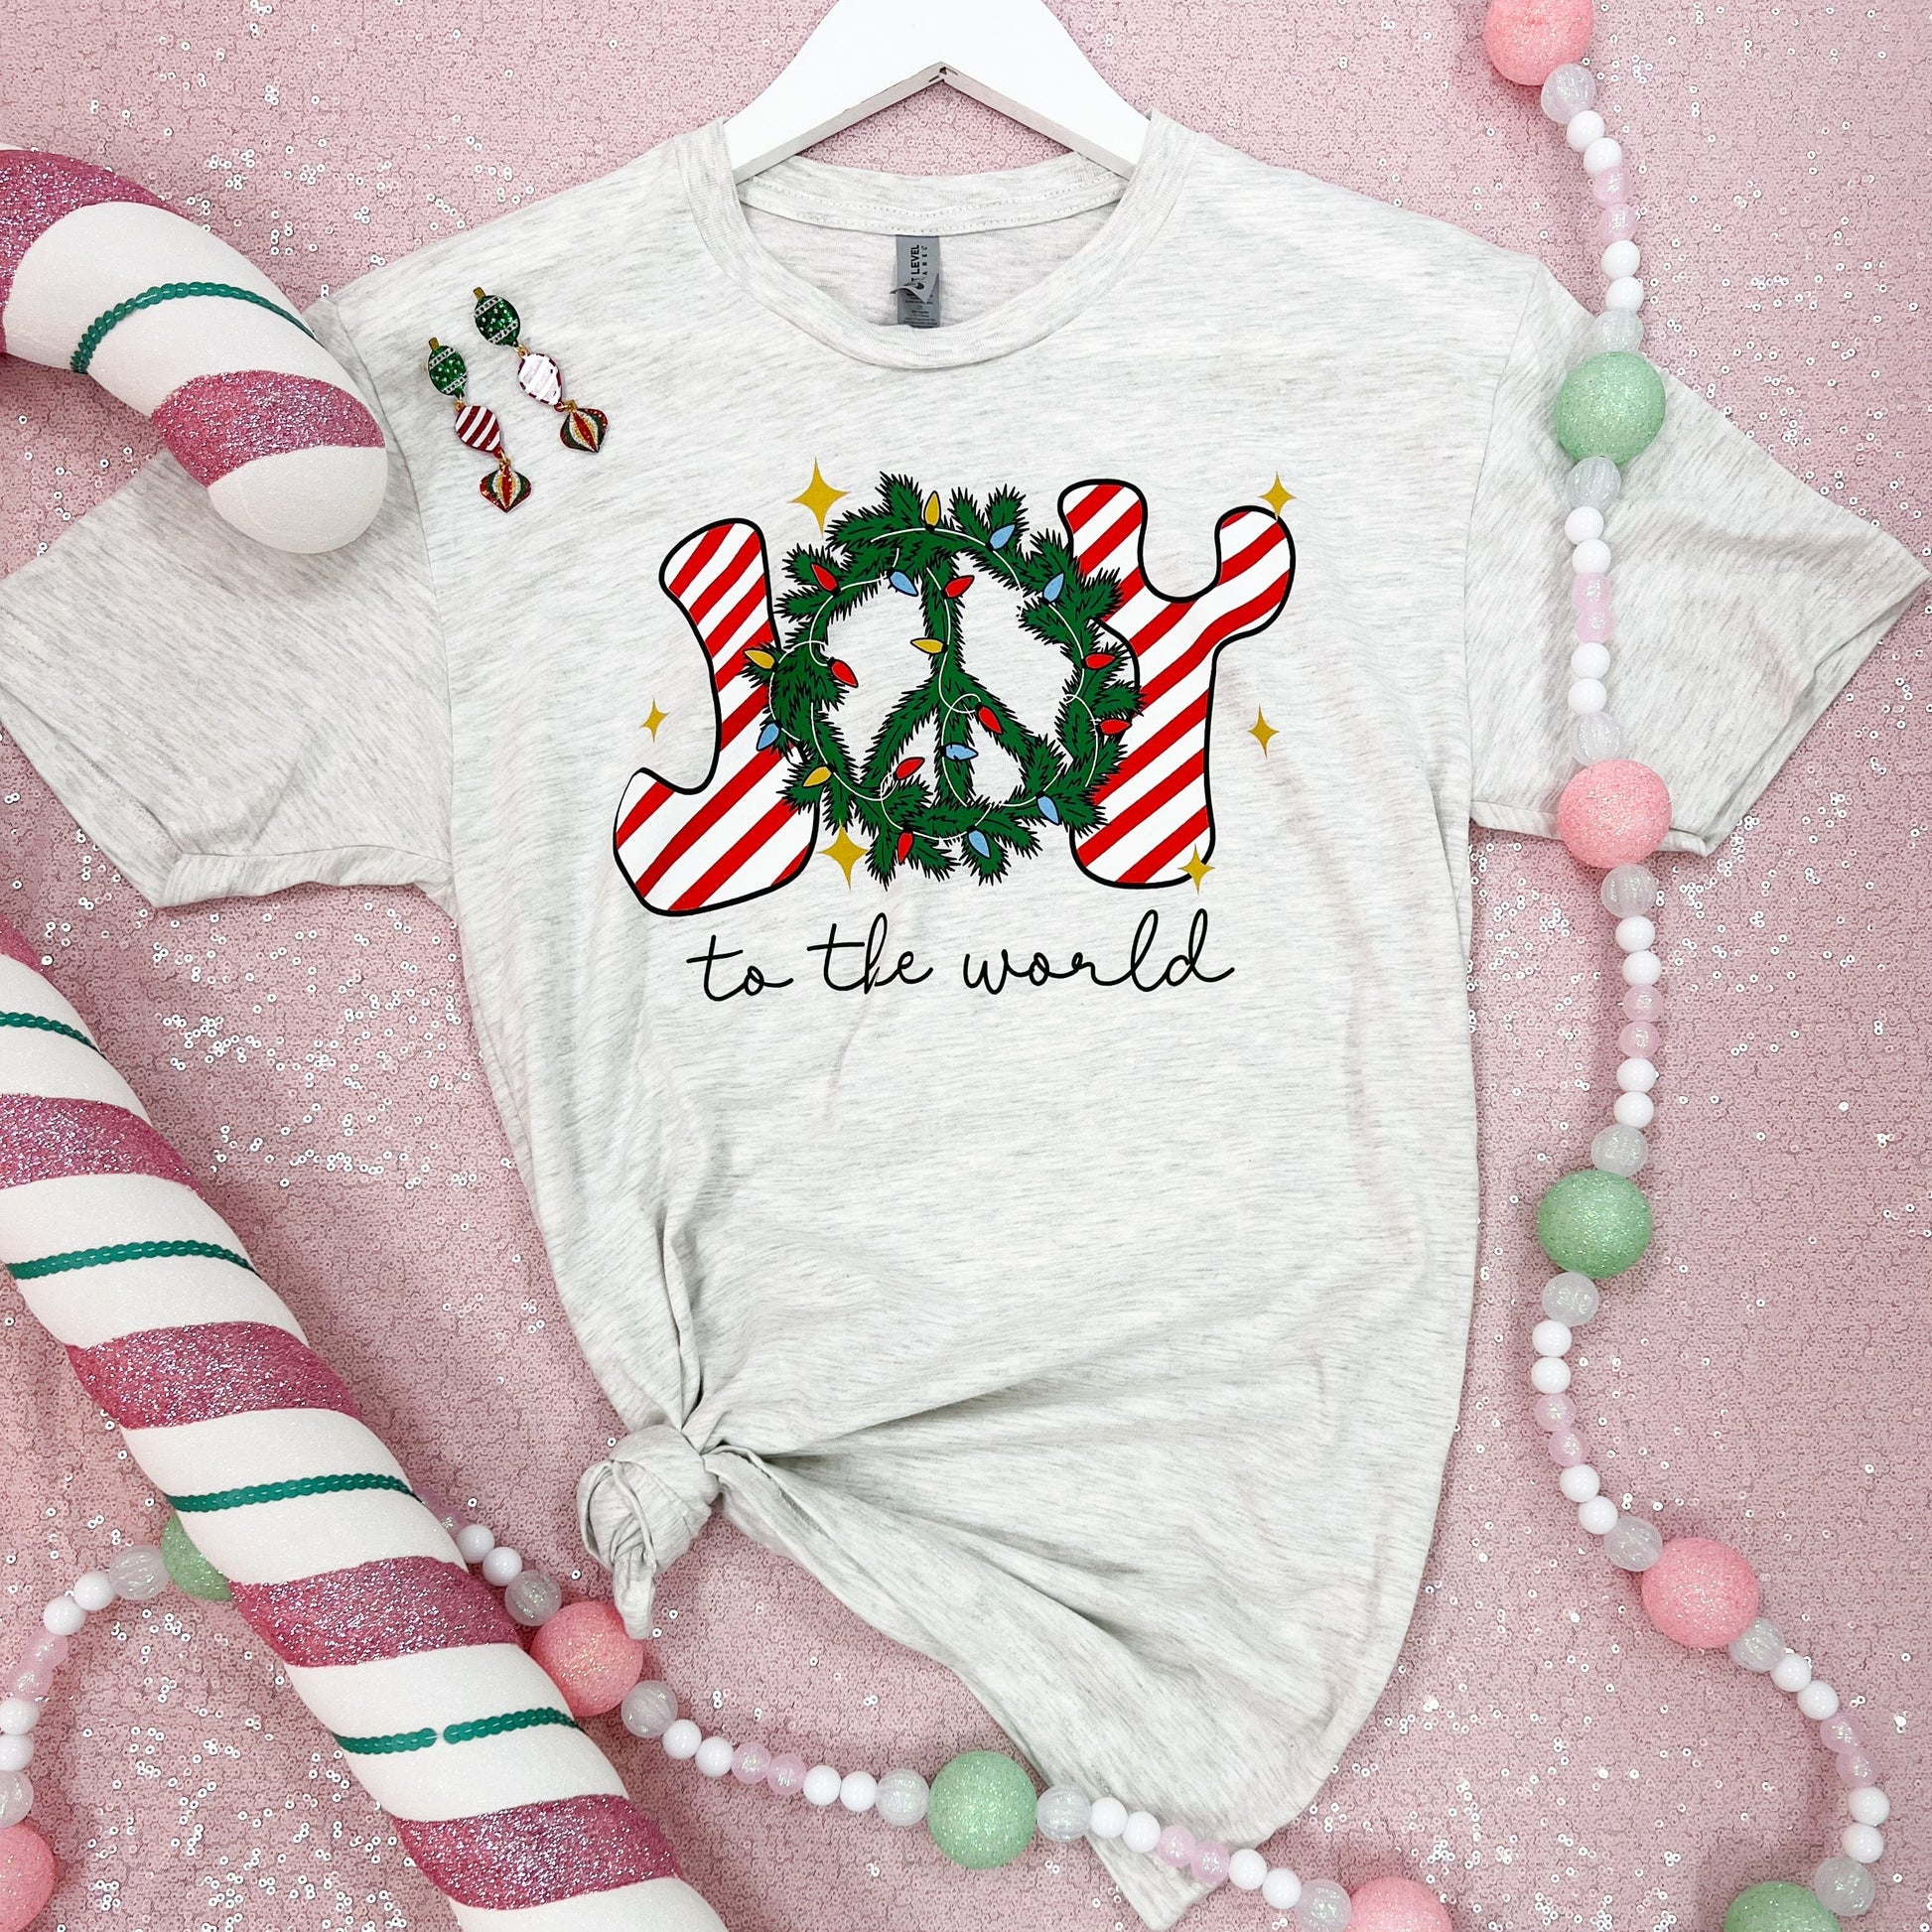 Envy Stylz Boutique Women - Apparel - Shirts - T-Shirts Joy To The World Soft Graphic Tee